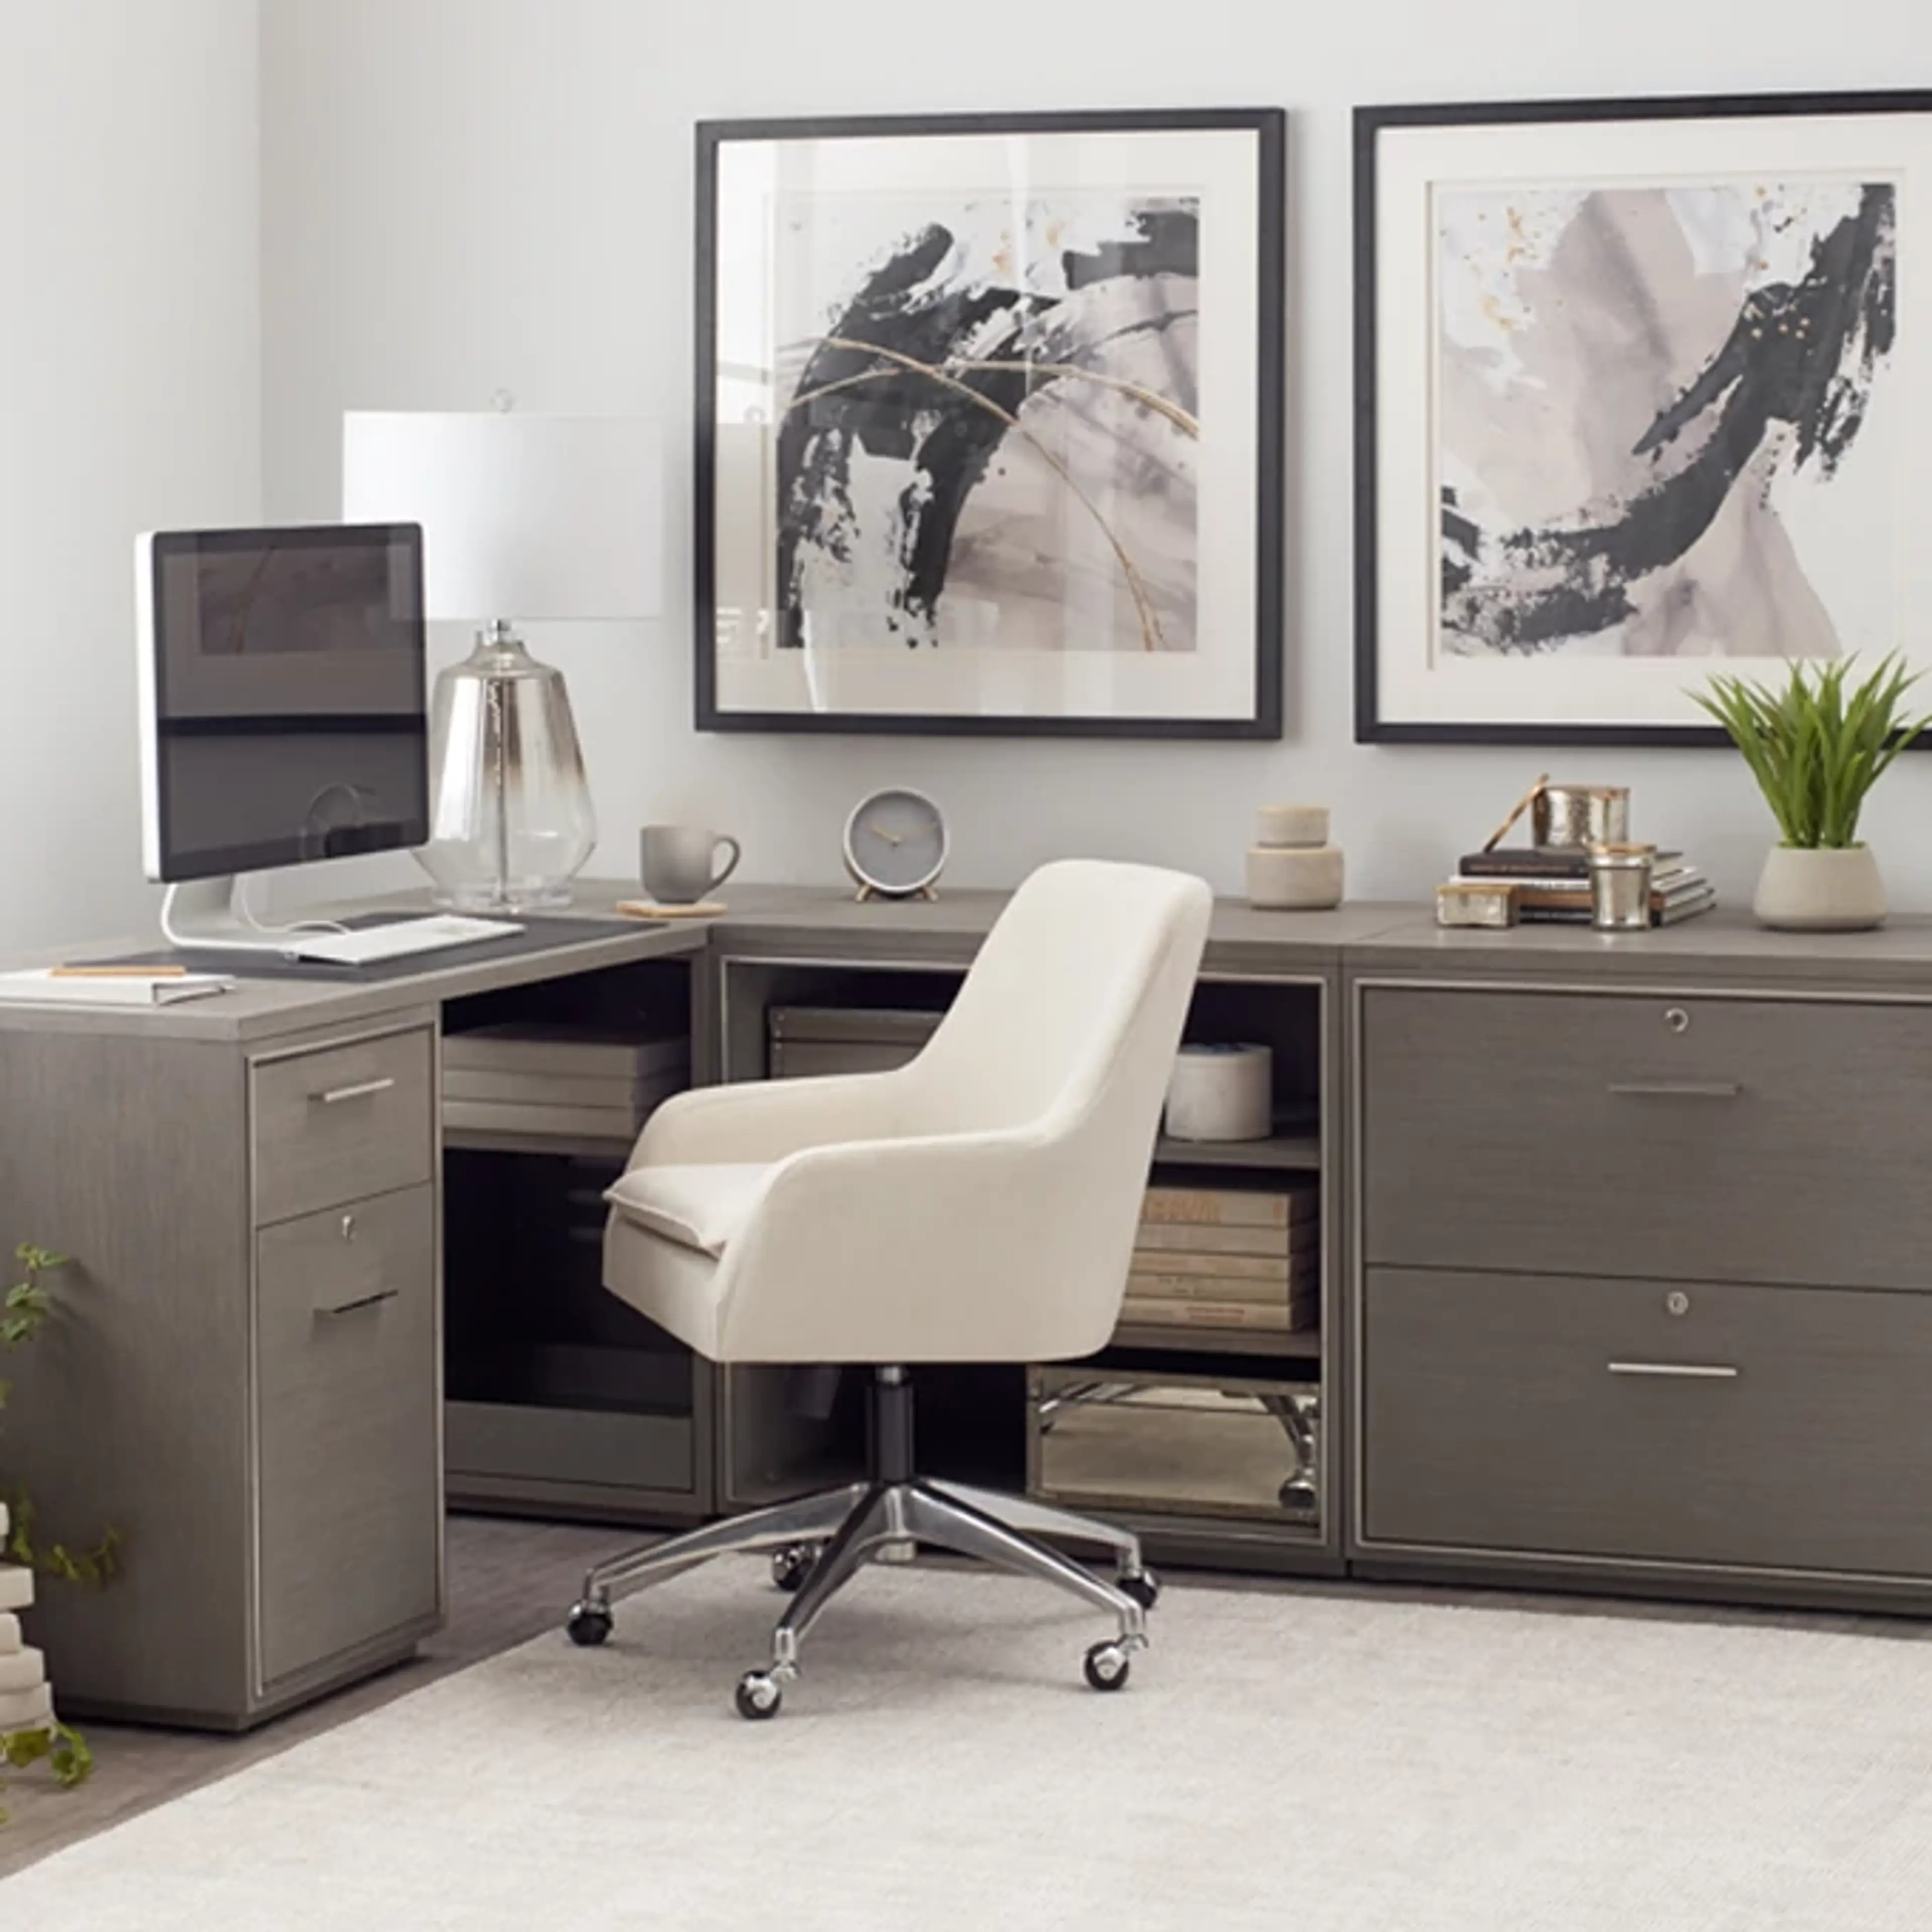 Functionality Meets Aesthetics in Workspace Design